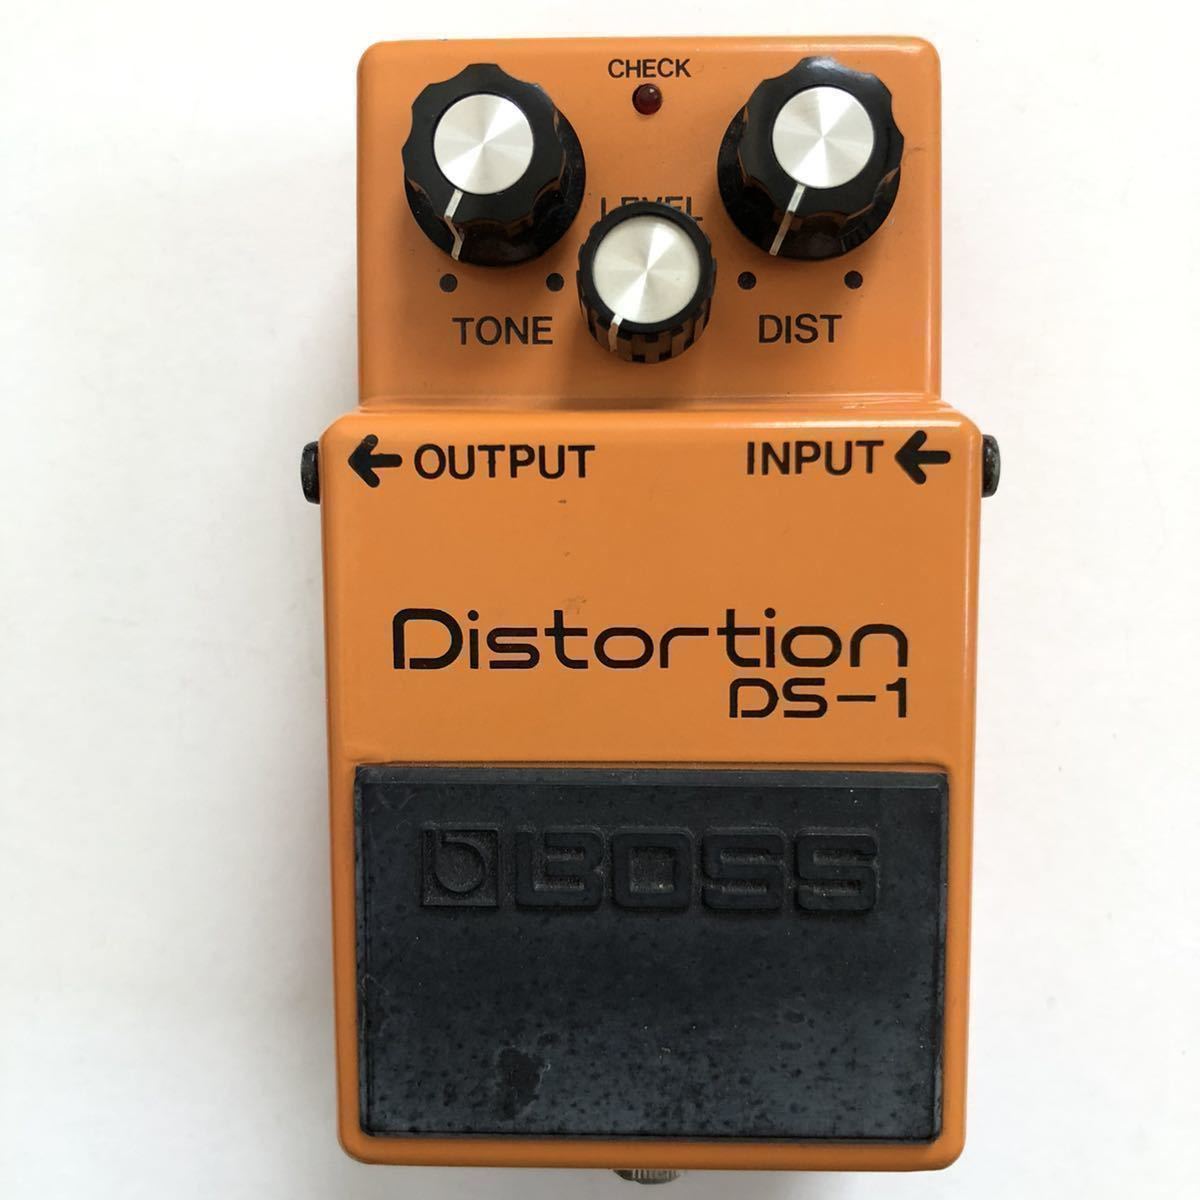 BOSS DS-1 ・ディストーション・銀ネジ・スケルトン・極初期ロット・ #7700!!!・TA7136P1・美品！・外箱付・MADE IN JAPAN